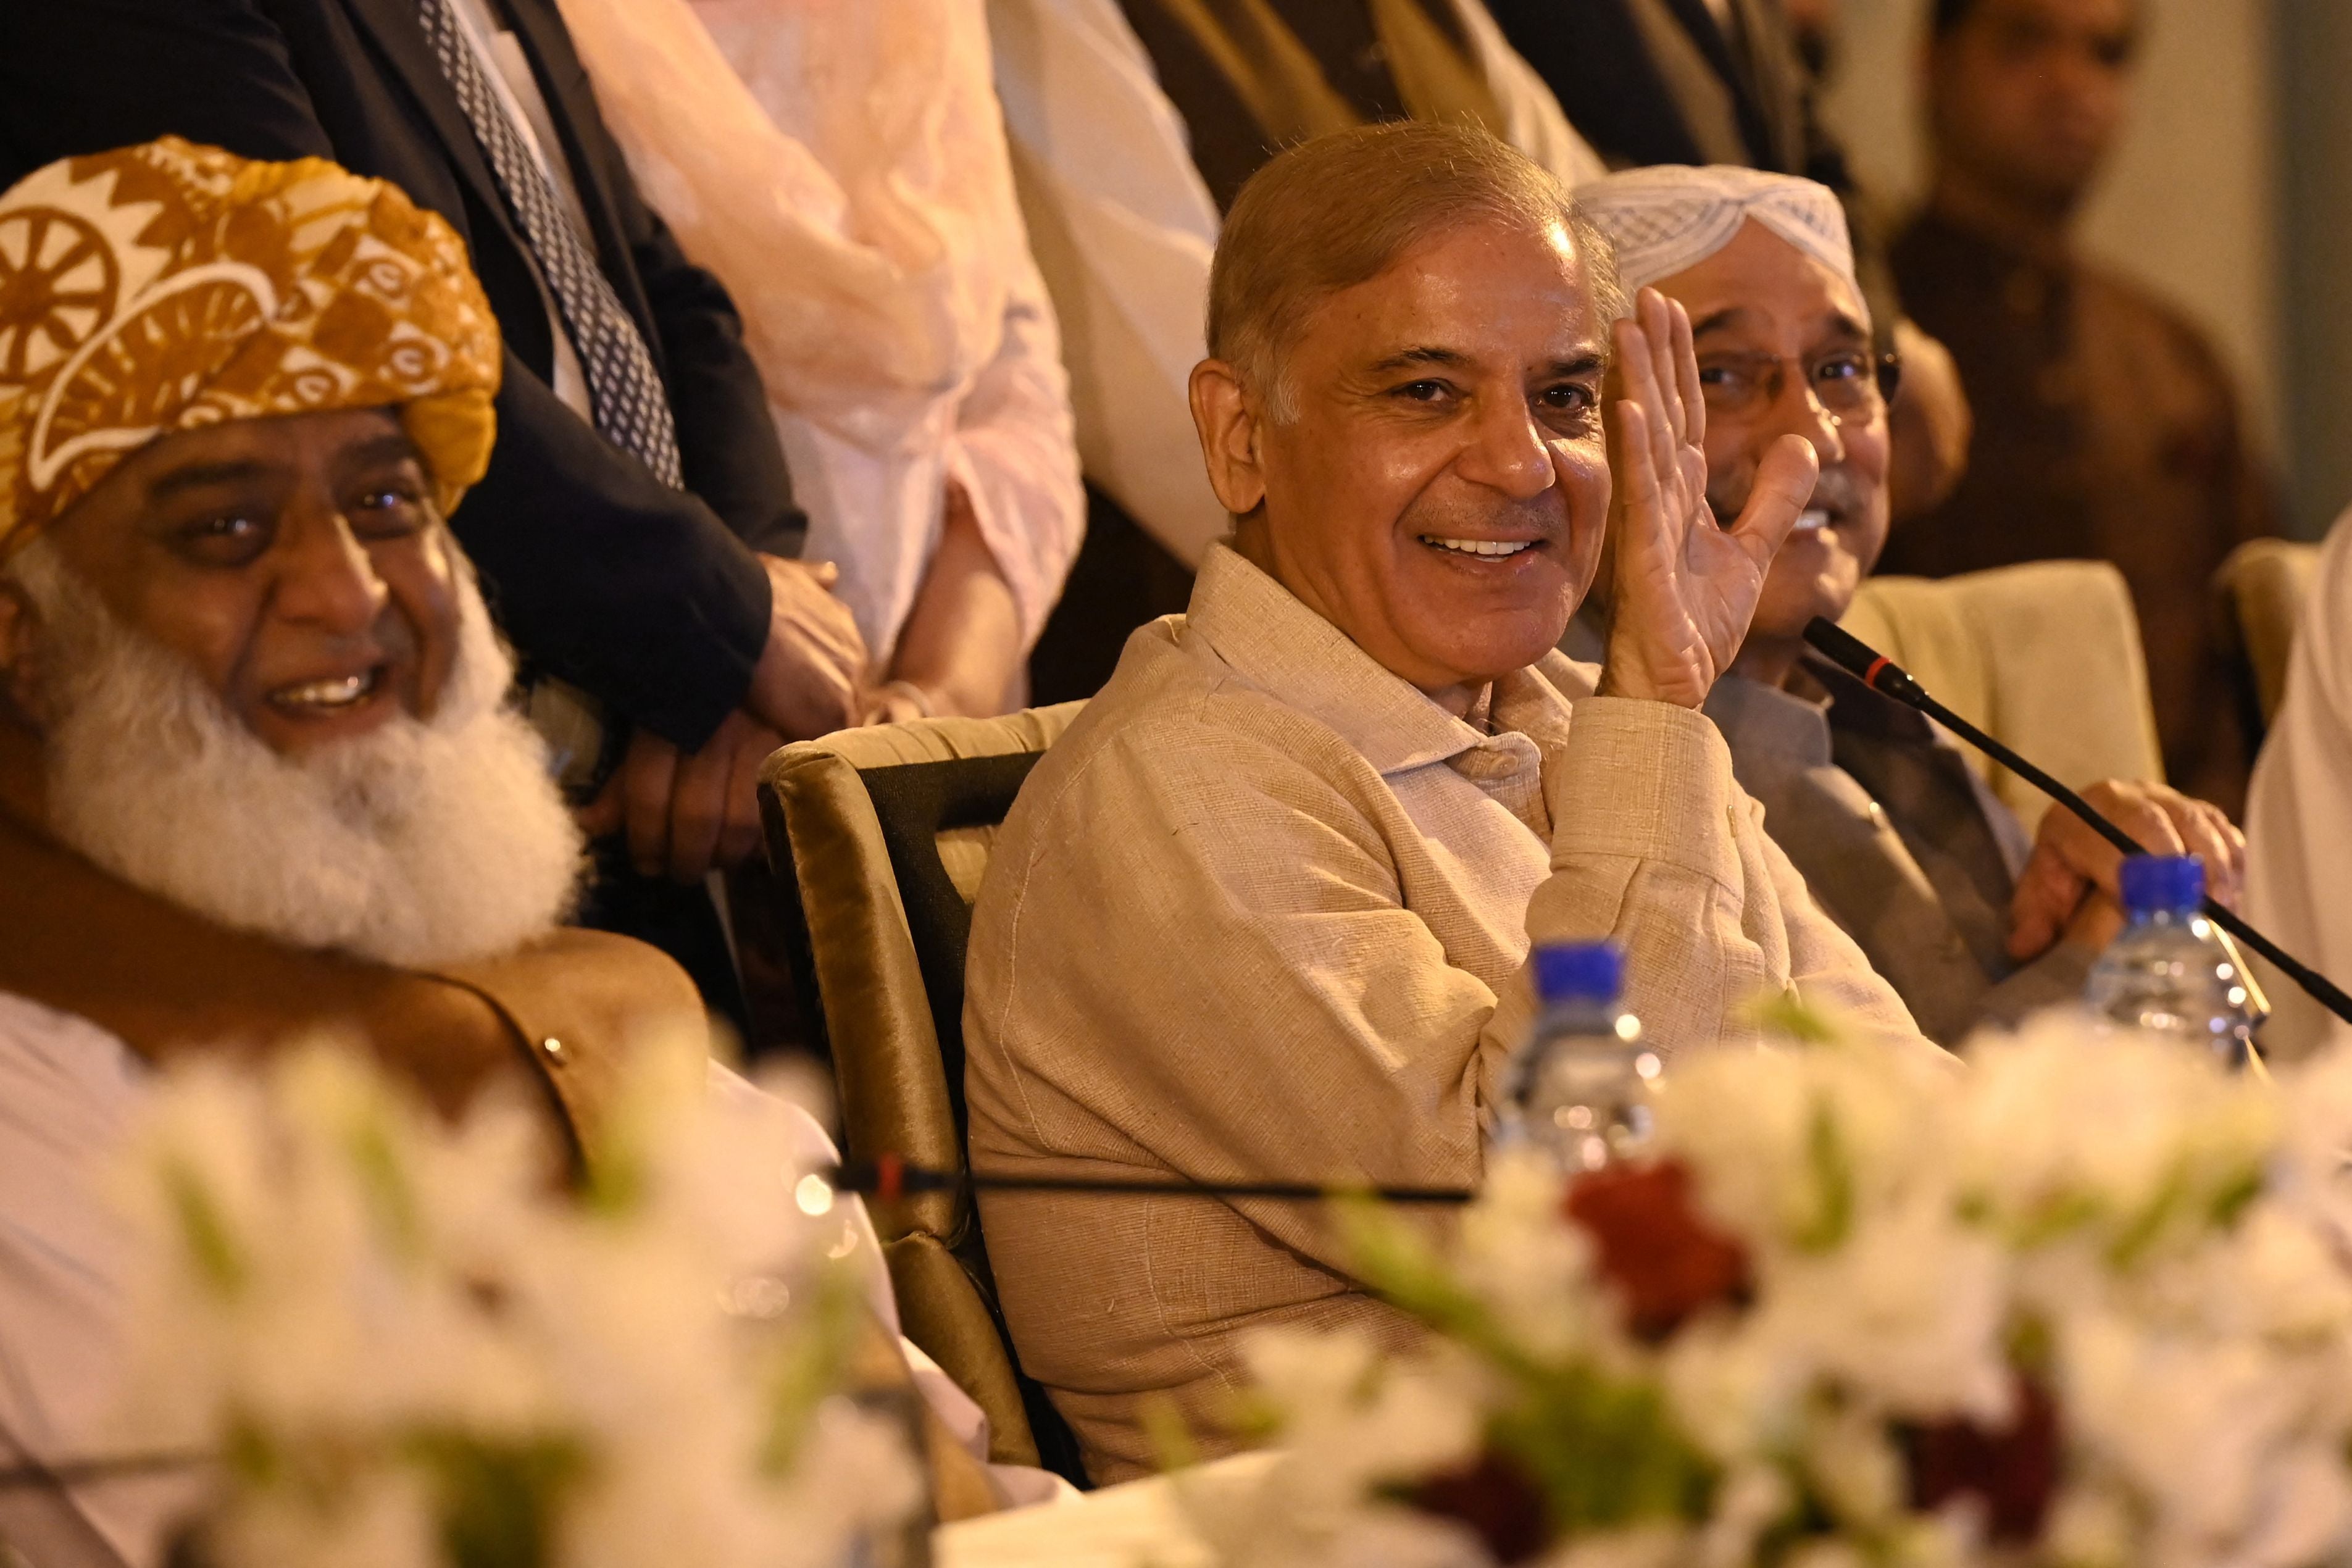 Pakistan’s opposition parties leaders Shehbaz Sharif (centre), Asif Ali Zardari (right) and Fazlur Rehman (left) speak during a press conference in Islamabad